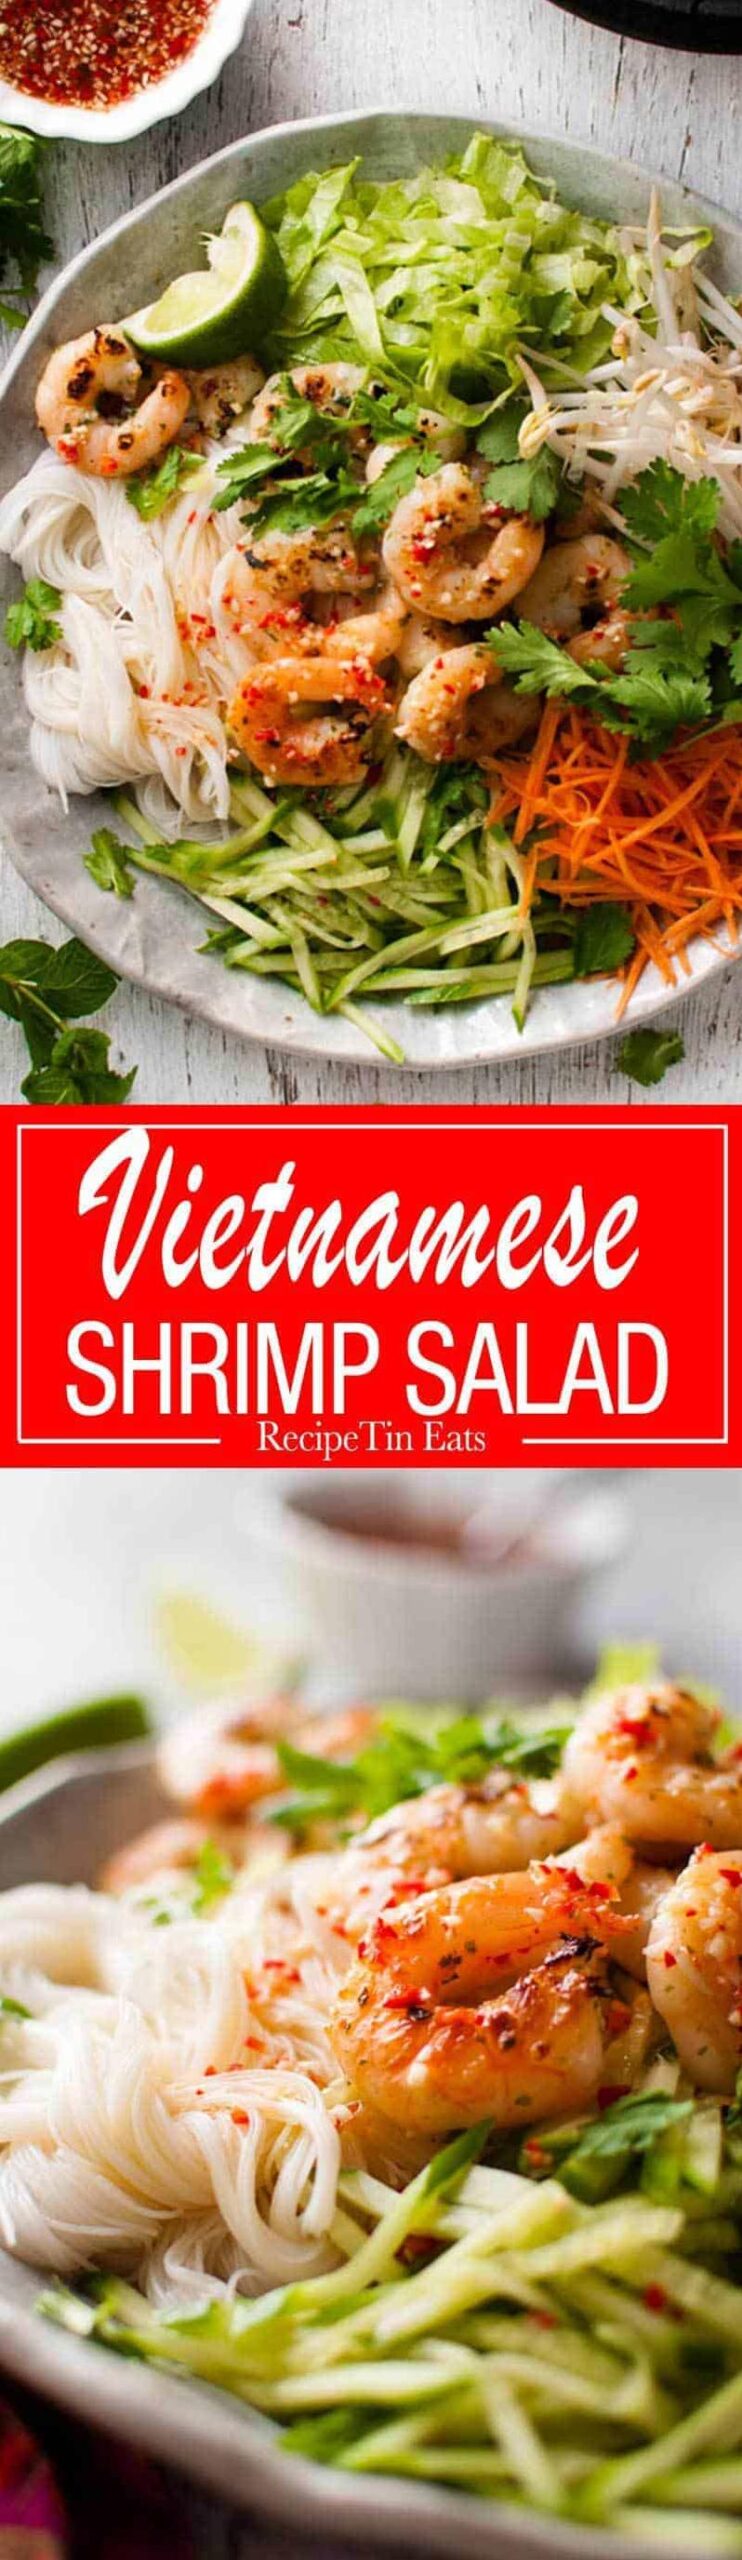  This salad is a taste of Vietnam in every bite